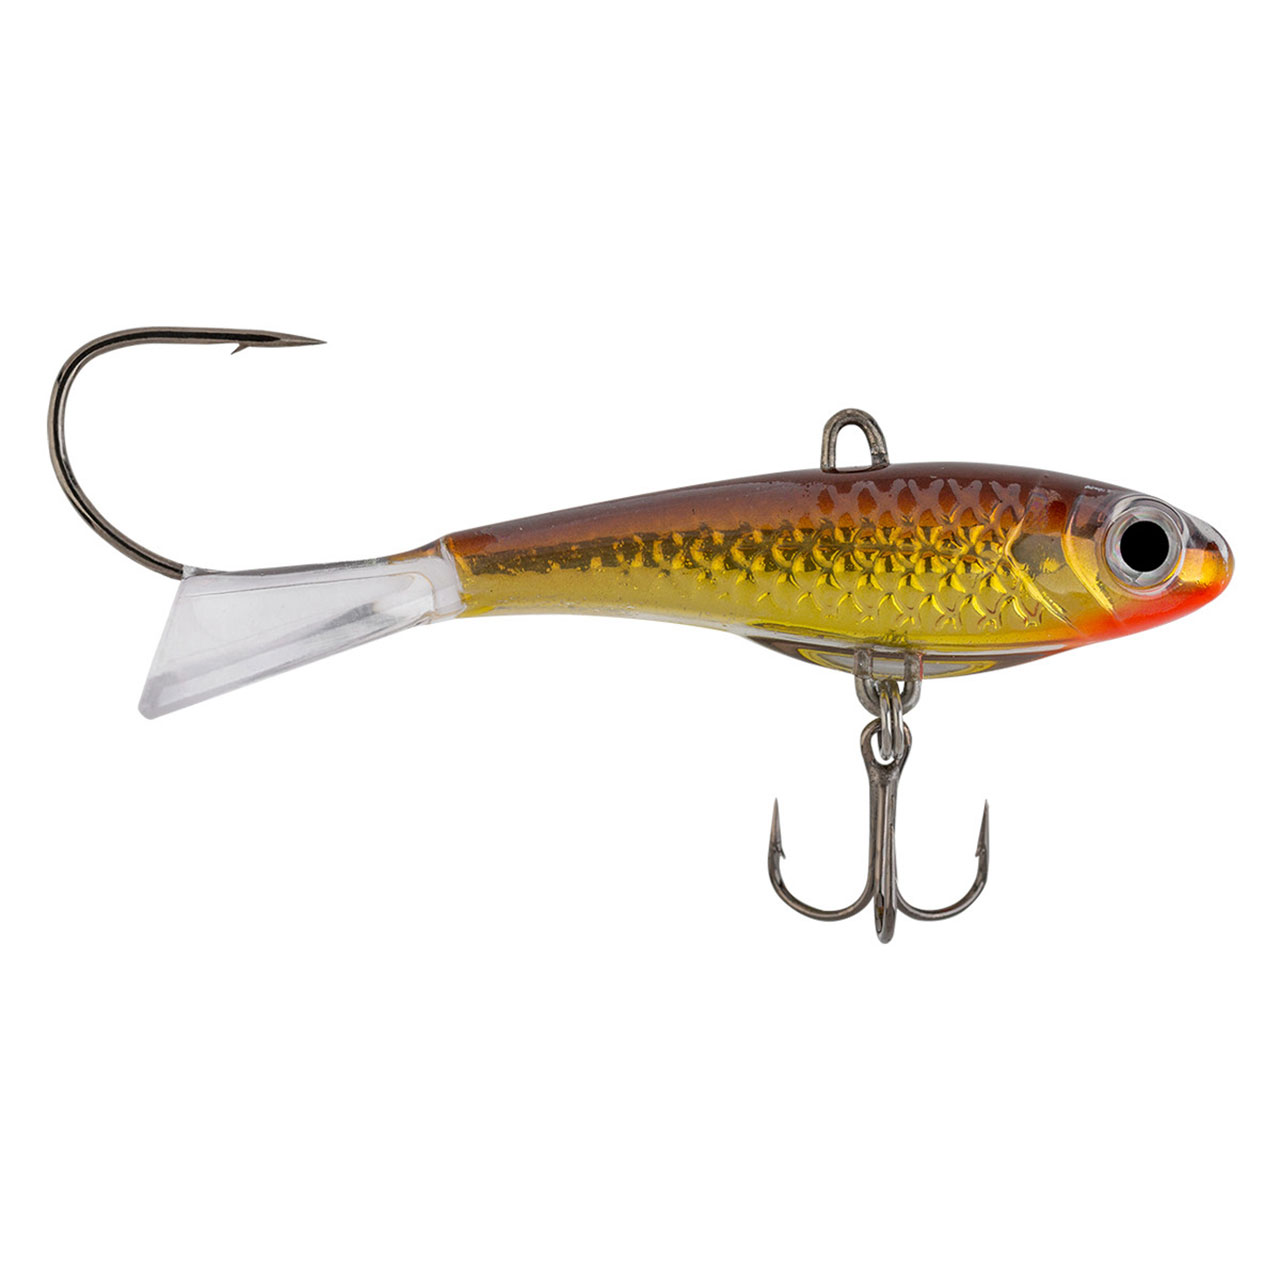 Northland Tackle Pitchin' Puppet - 1 oz. - Gold Shiner